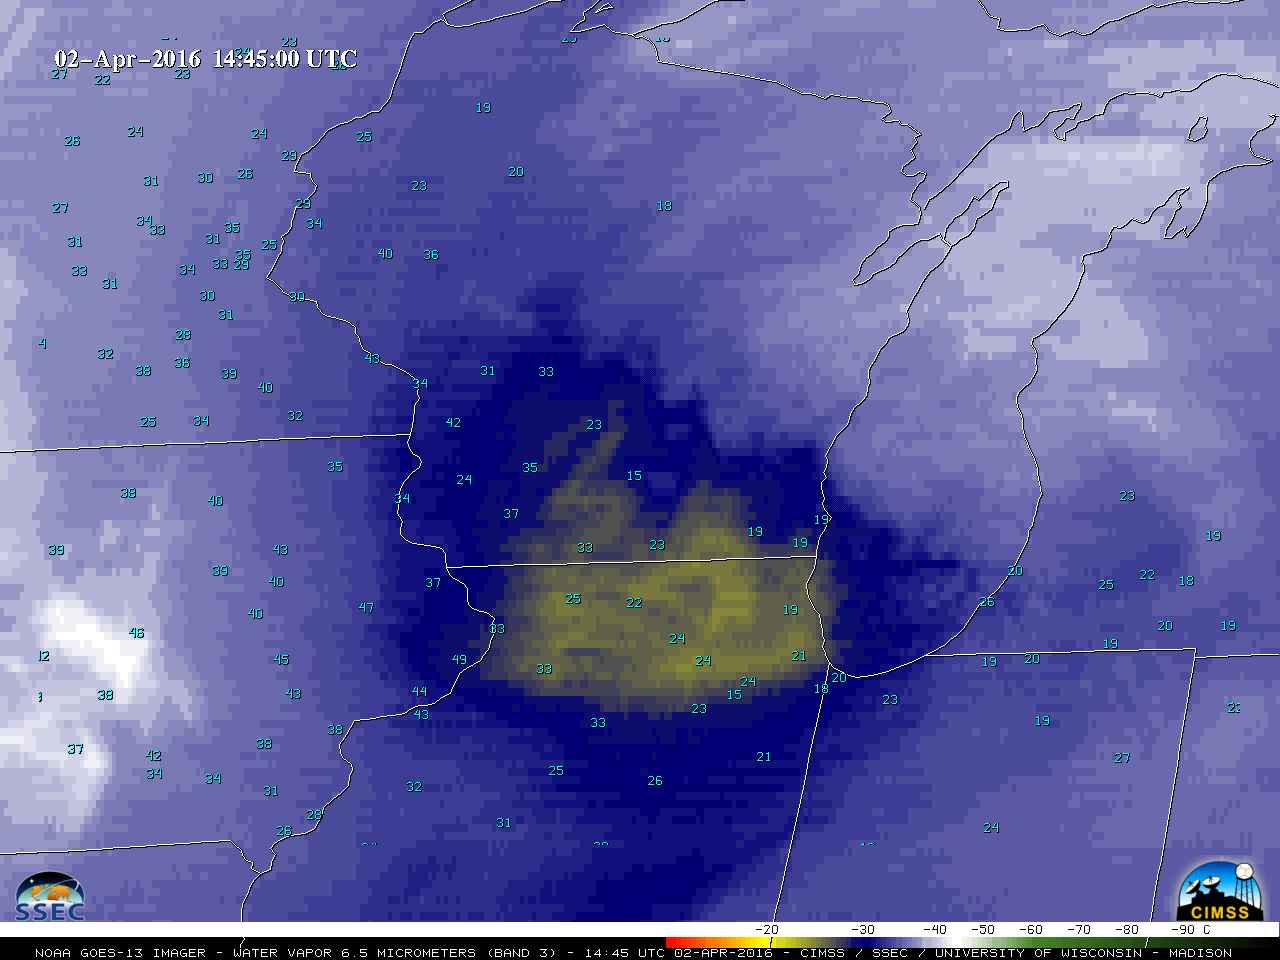 GOES-13 Water Vapor (6.5 µm) images with hourly wind gusts in knots [click to play animation]